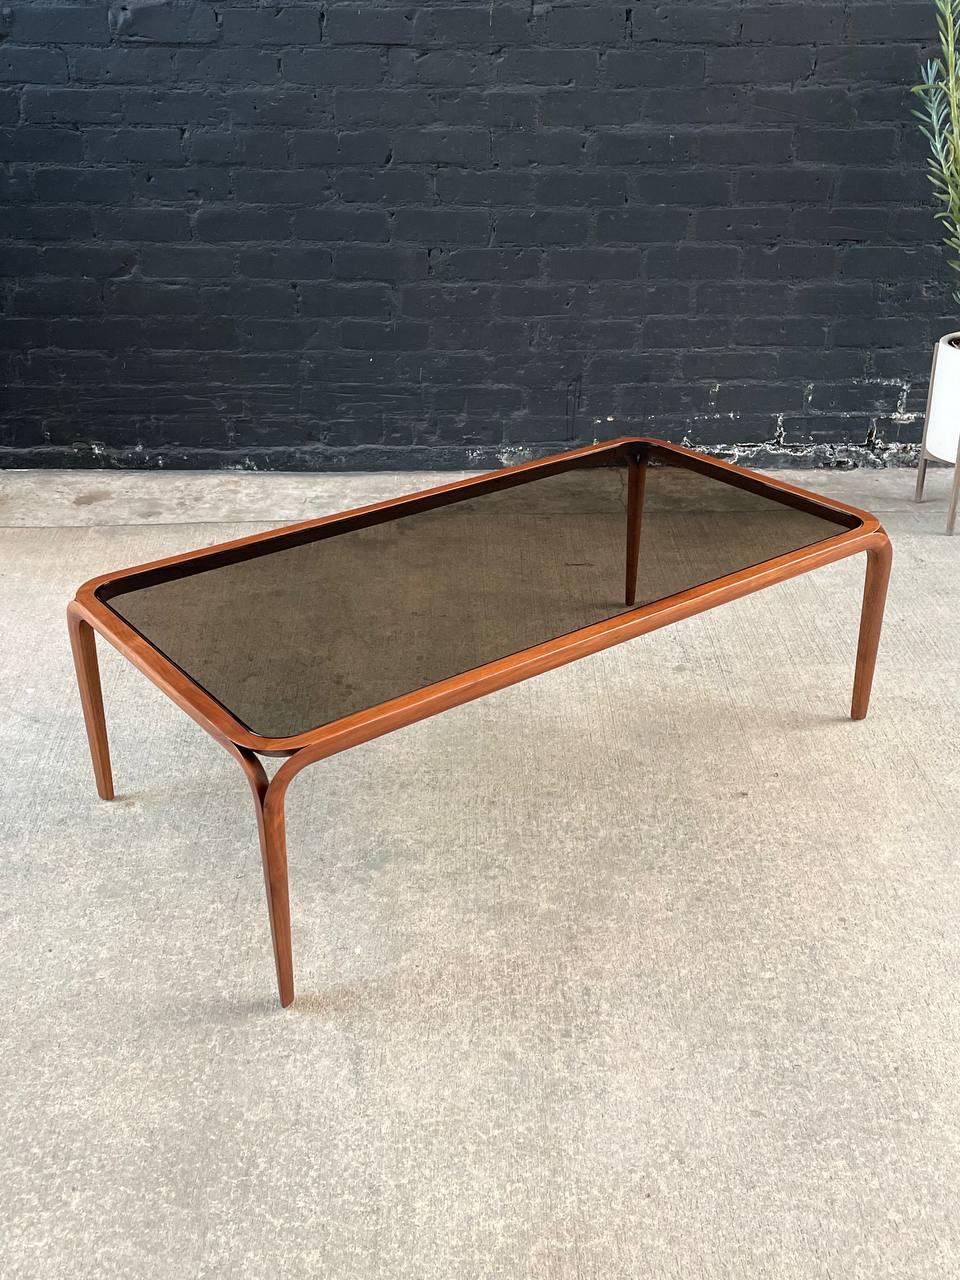 Newly Refinished, Original Smoke Glass Top

With over 15 years of experience, our workshop has followed a careful process of restoration, showcasing our passion and creativity for vintage designs that can seamlessly be incorporated with many